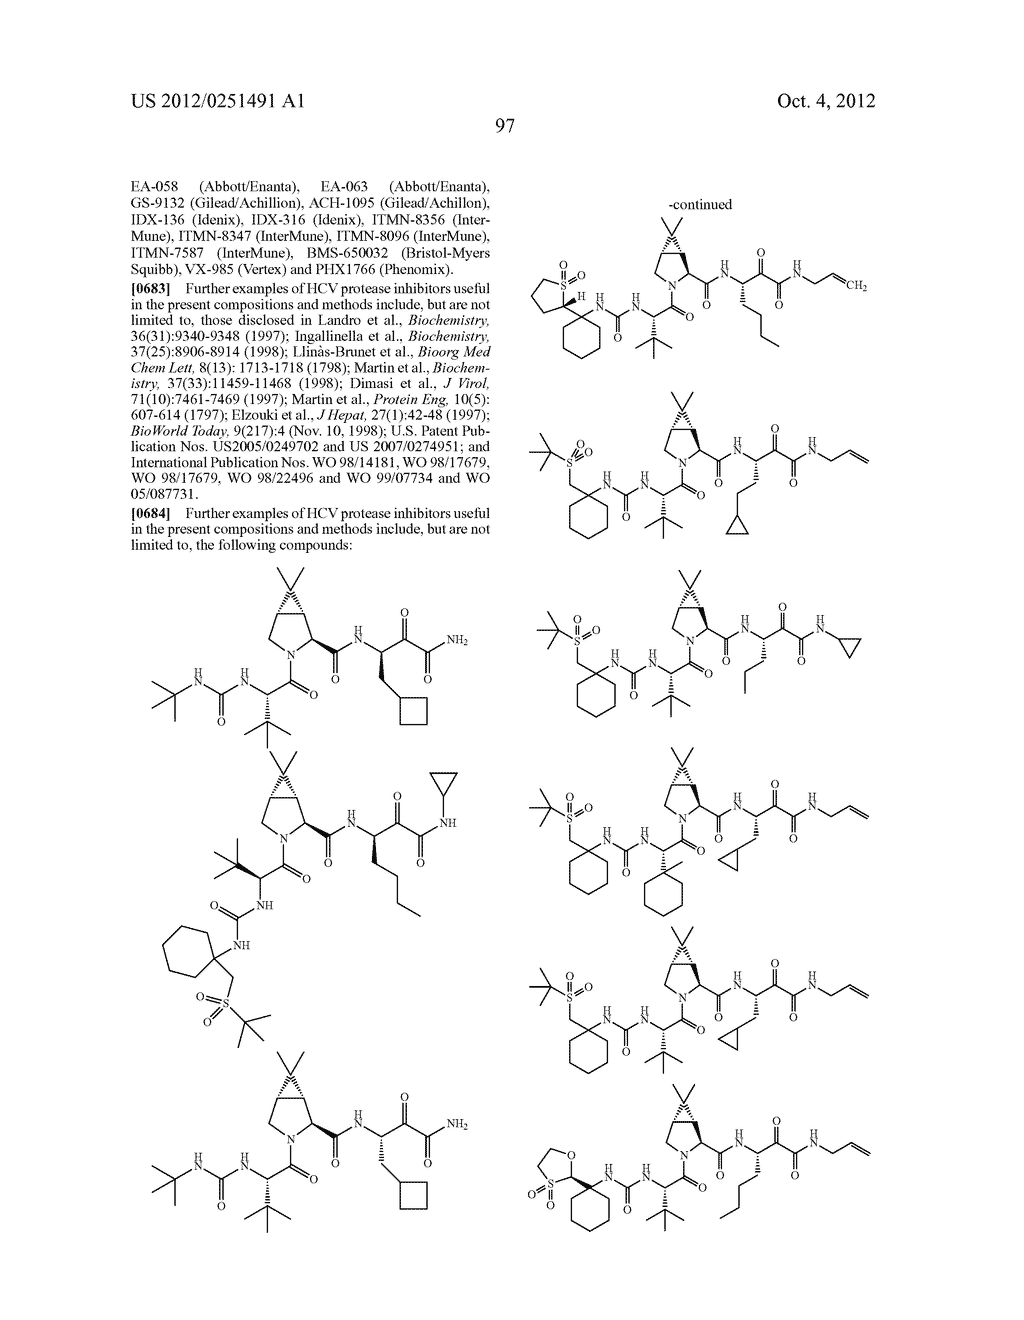 FUSED TRICYCLIC ARYL COMPOUNDS USEFUL FOR THE TREATMENT OF VIRAL DISEASES - diagram, schematic, and image 98